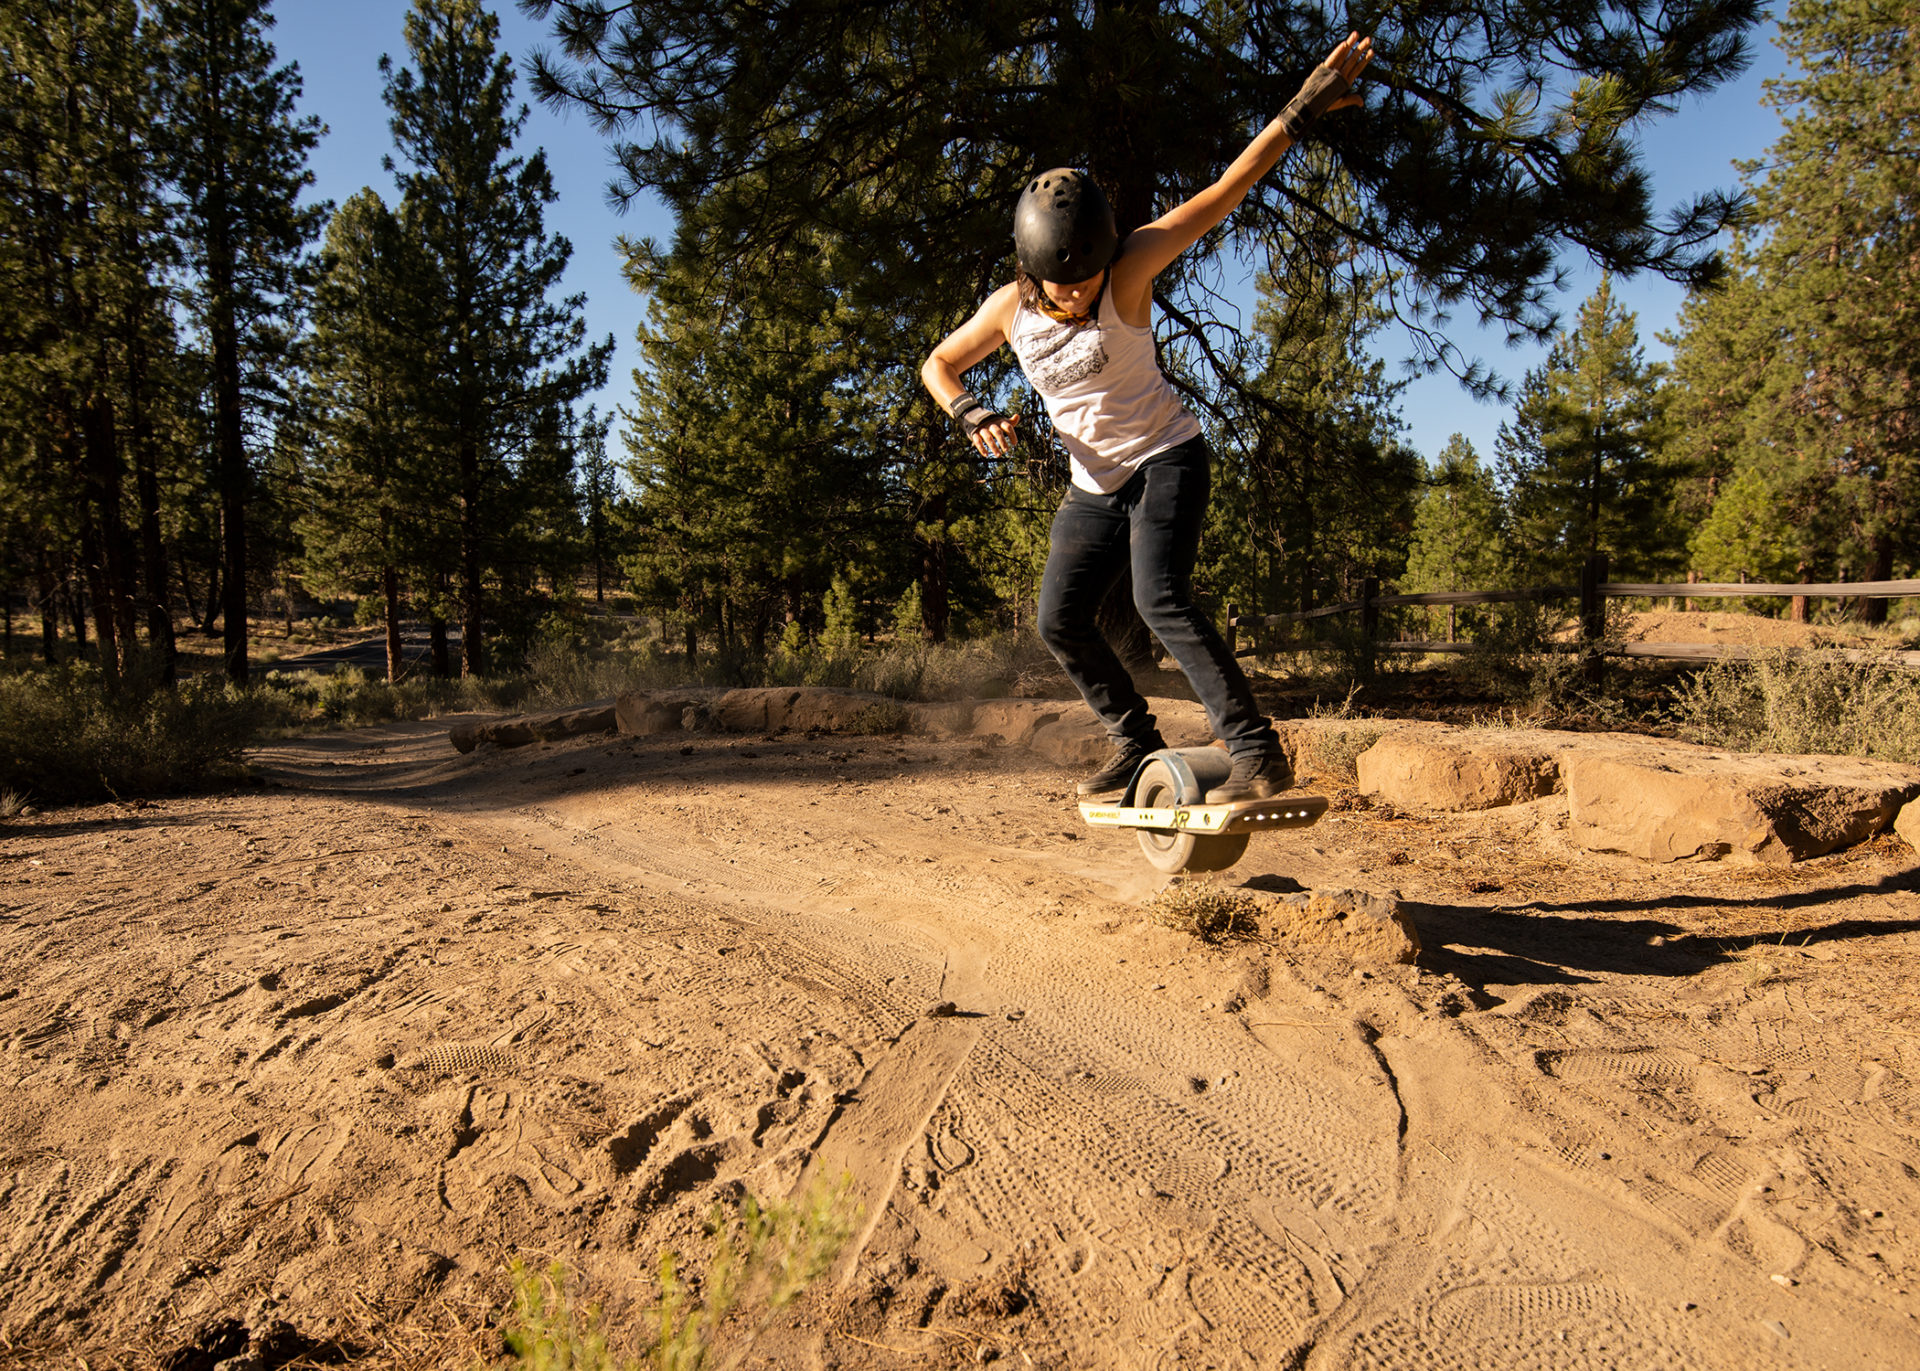 Racheal Cecil bonks her onewheel over a rock in the high desert of Bend, Oregon.